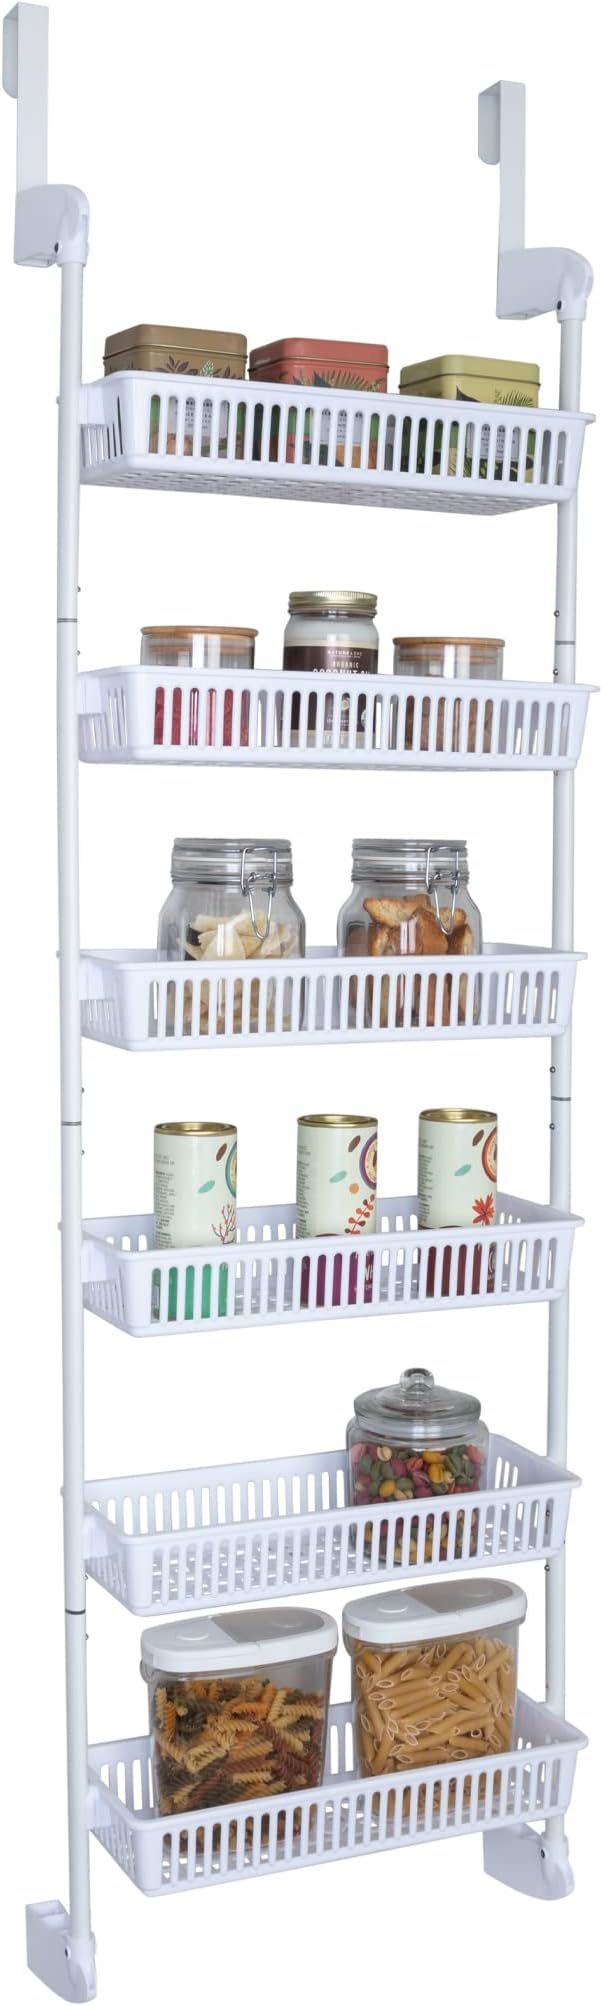 Smart Design 6-Tier Over The Door Pantry Organizer with 6 Full Baskets - Steel and Resin with Sta... | Amazon (US)